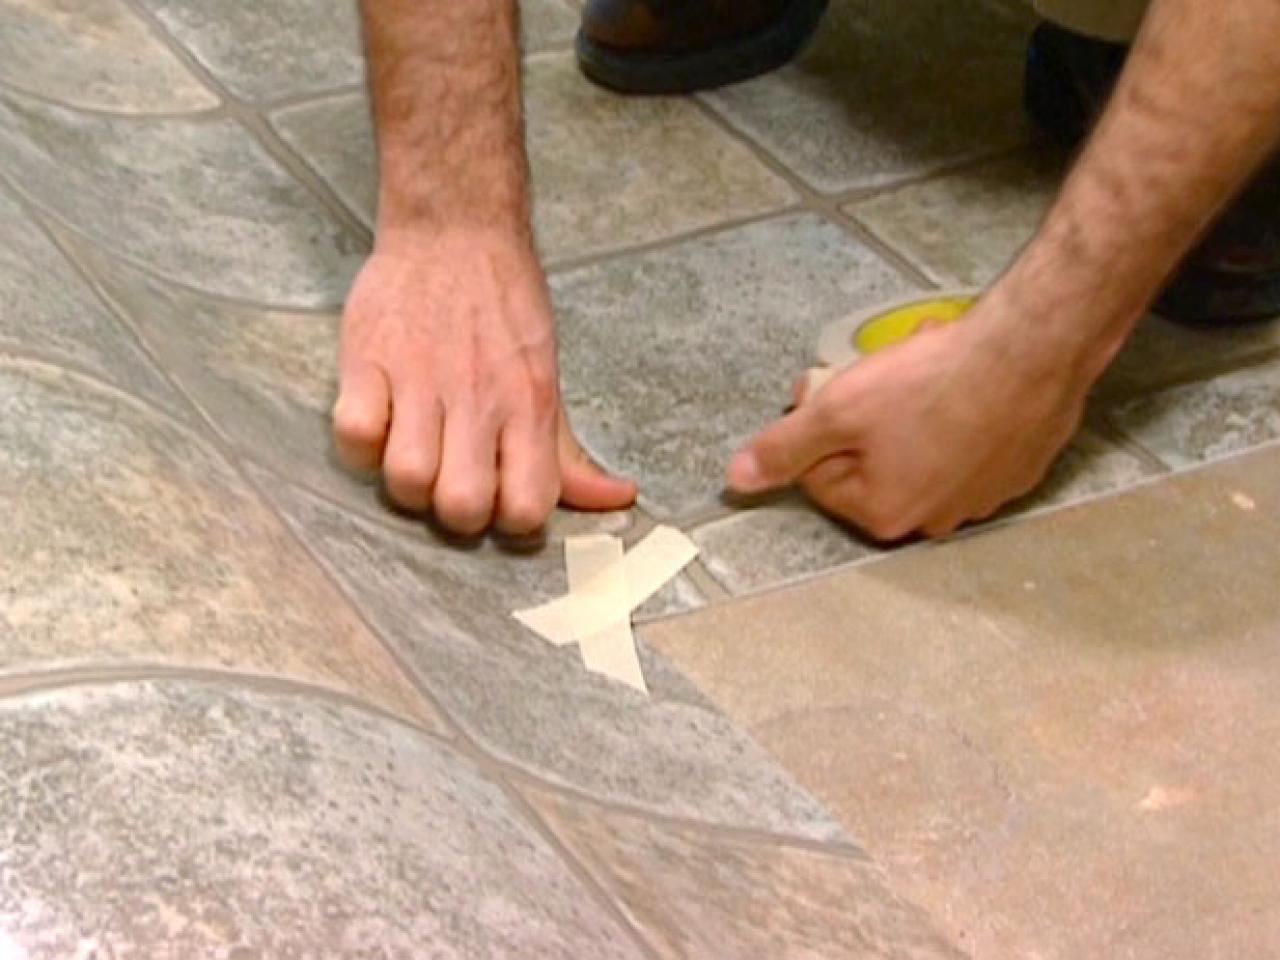 How To Install Vinyl Flooring Tos, How To Remove Sticky Tape Residue From Vinyl Flooring